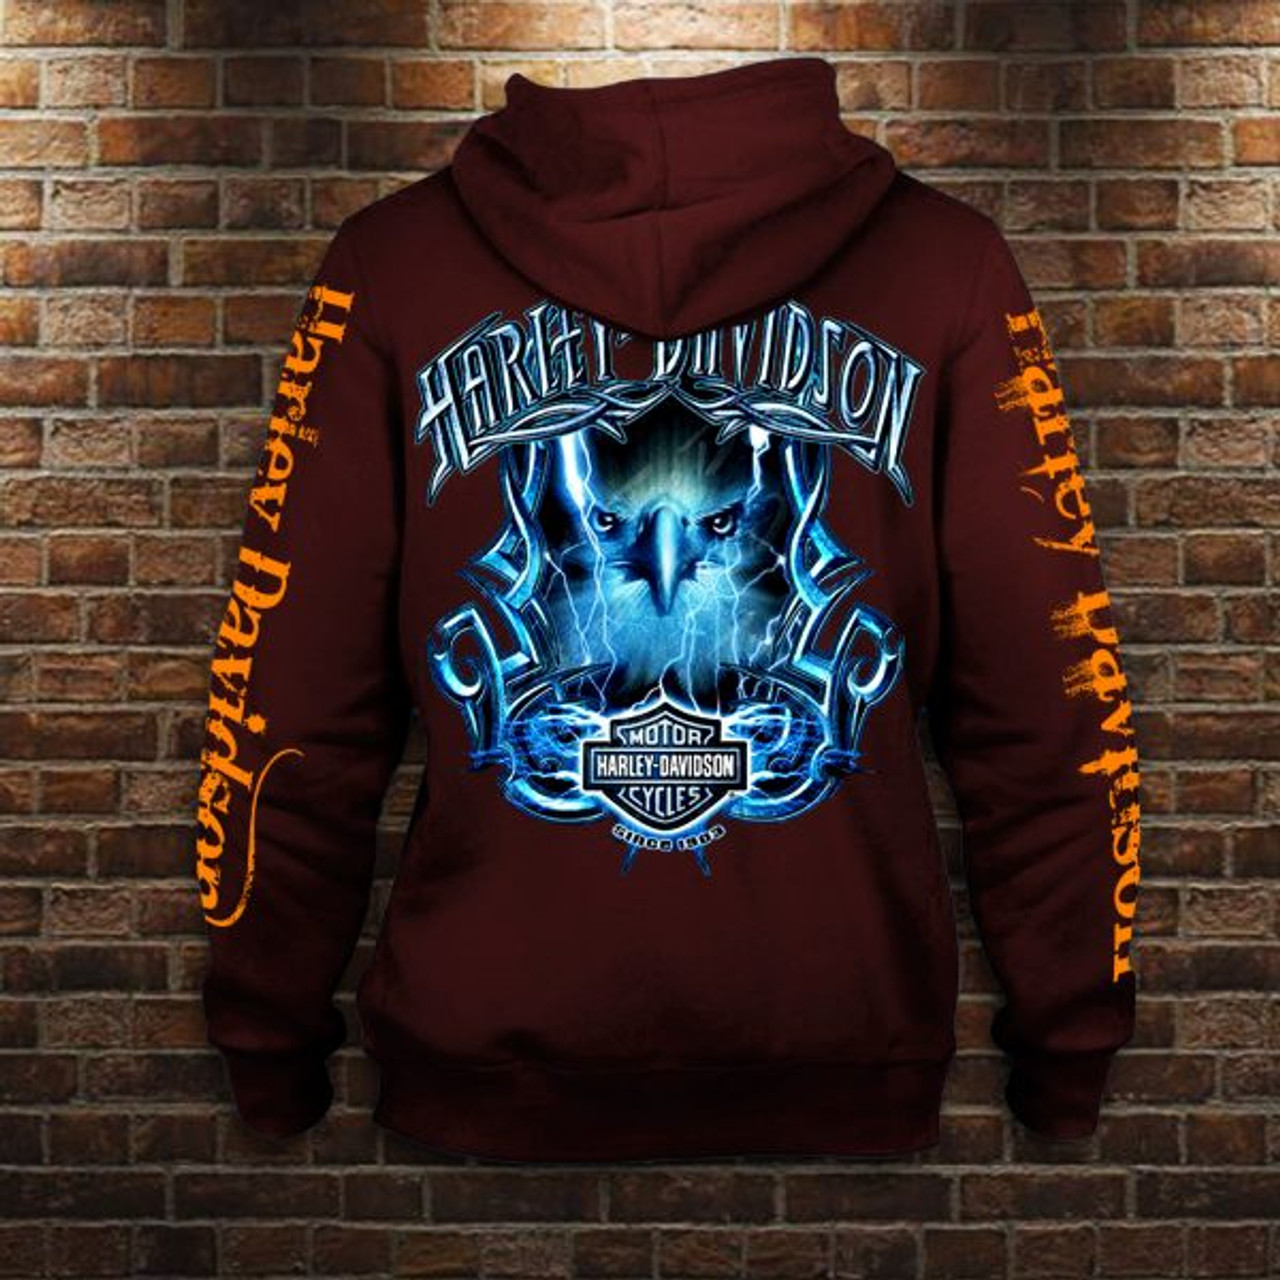  OFFICIAL HARLEY DAVIDSON MOTORCYCLE PULLOVER HOODIES  